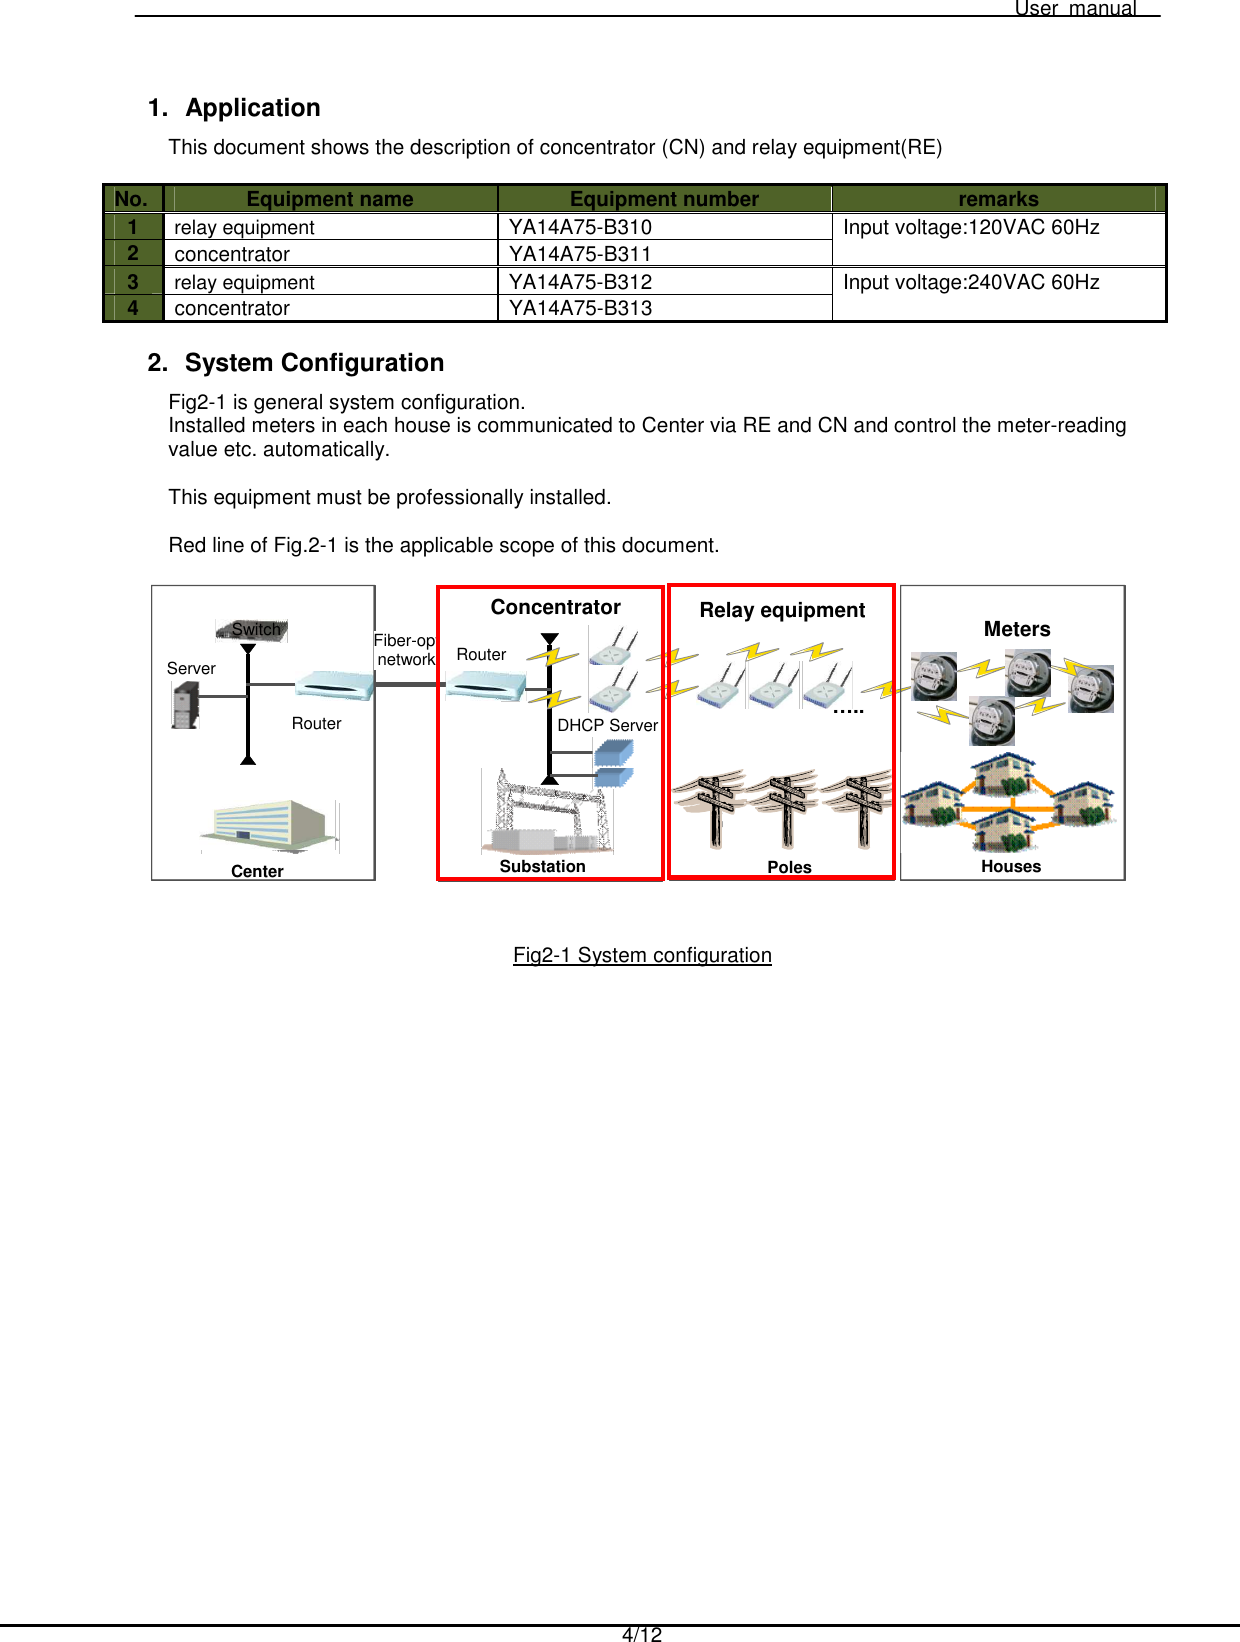   User  manual  4/12   1.  Application This document shows the description of concentrator (CN) and relay equipment(RE)  No. Equipment name  Equipment number  remarks 1 relay equipment YA14A75-B310  Input voltage:120VAC 60Hz 2  concentrator  YA14A75-B311 3 relay equipment YA14A75-B312  Input voltage:240VAC 60Hz 4  concentrator  YA14A75-B313  2.  System Configuration Fig2-1 is general system configuration. Installed meters in each house is communicated to Center via RE and CN and control the meter-reading value etc. automatically.  This equipment must be professionally installed.  Red line of Fig.2-1 is the applicable scope of this document.    Fig2-1 System configuration  Substation PolesHouses…..CenterServer -DHCP ServerRouterRouter Fiber-optnetwork Relay equipment SwitchMeters Concentrator 